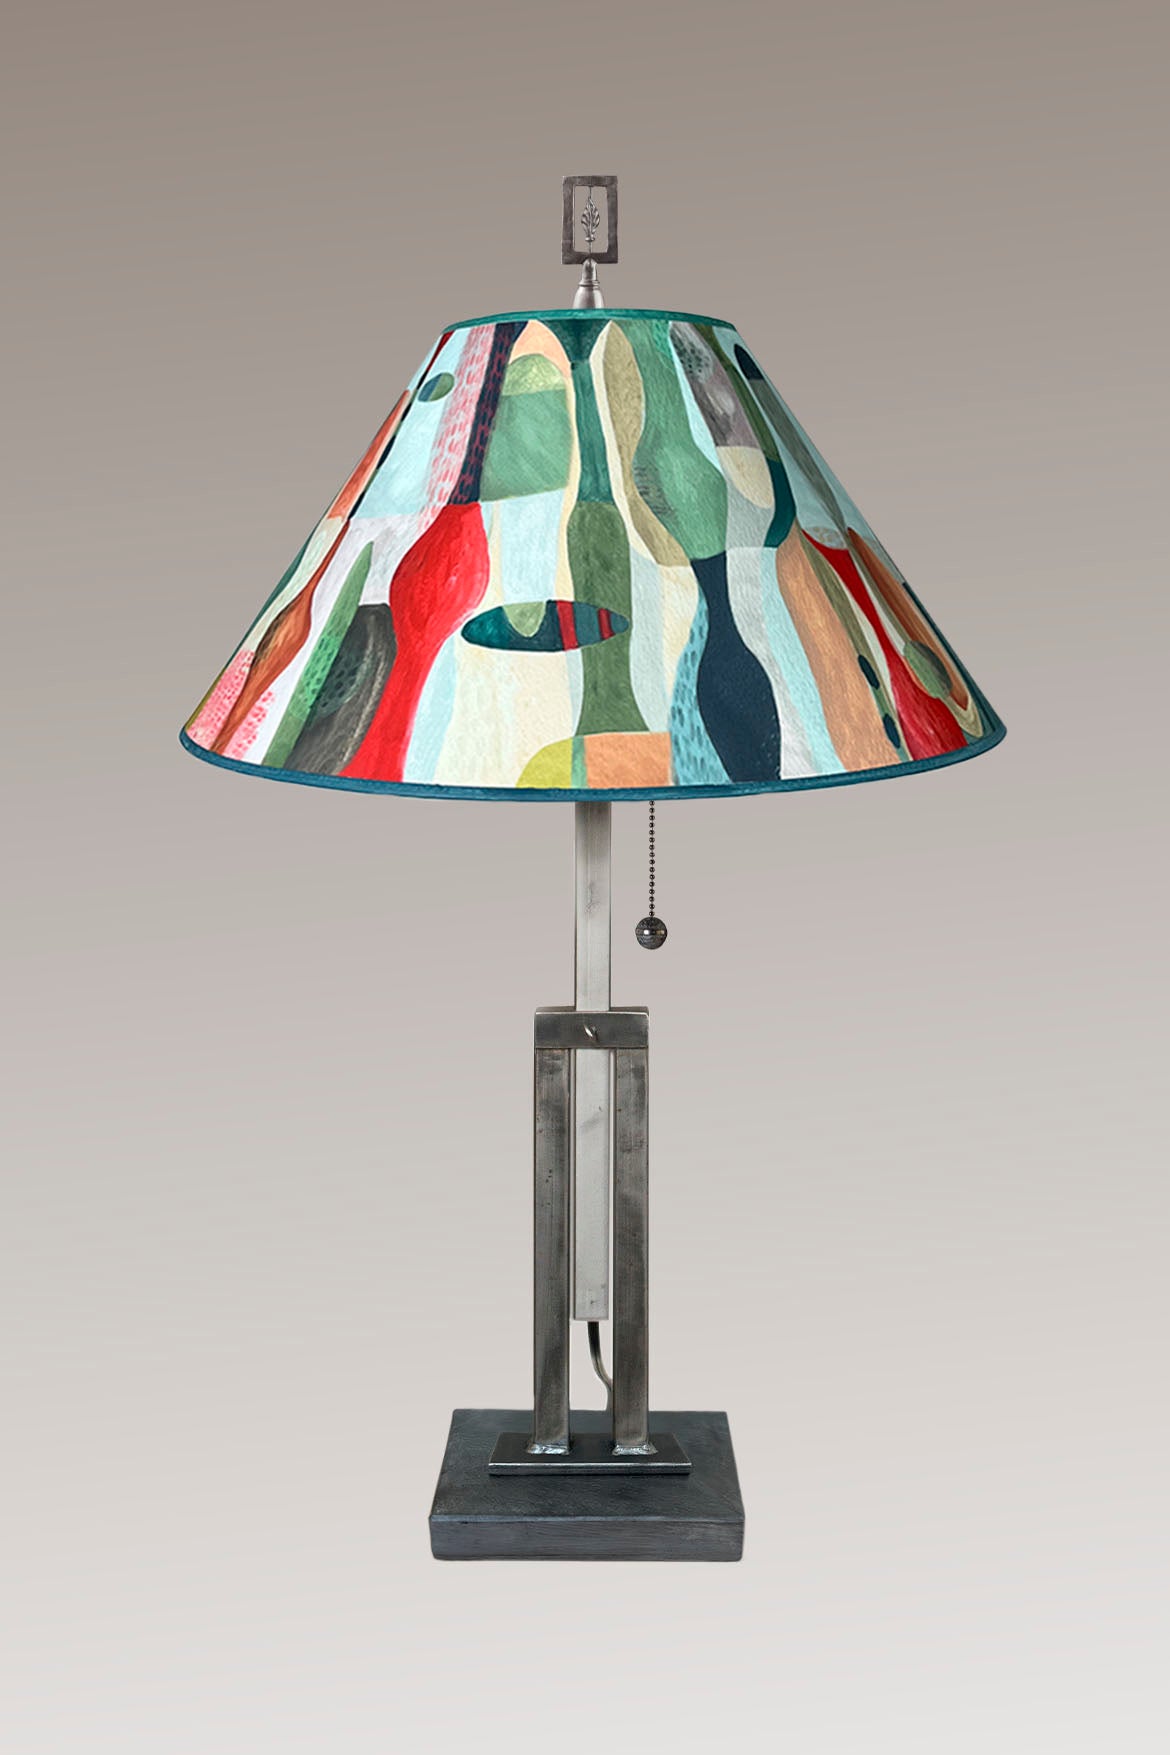 Janna Ugone & Co Table Lamp Adjustable-Height Steel Table Lamp with Large Conical Shade in Riviera in Poppy